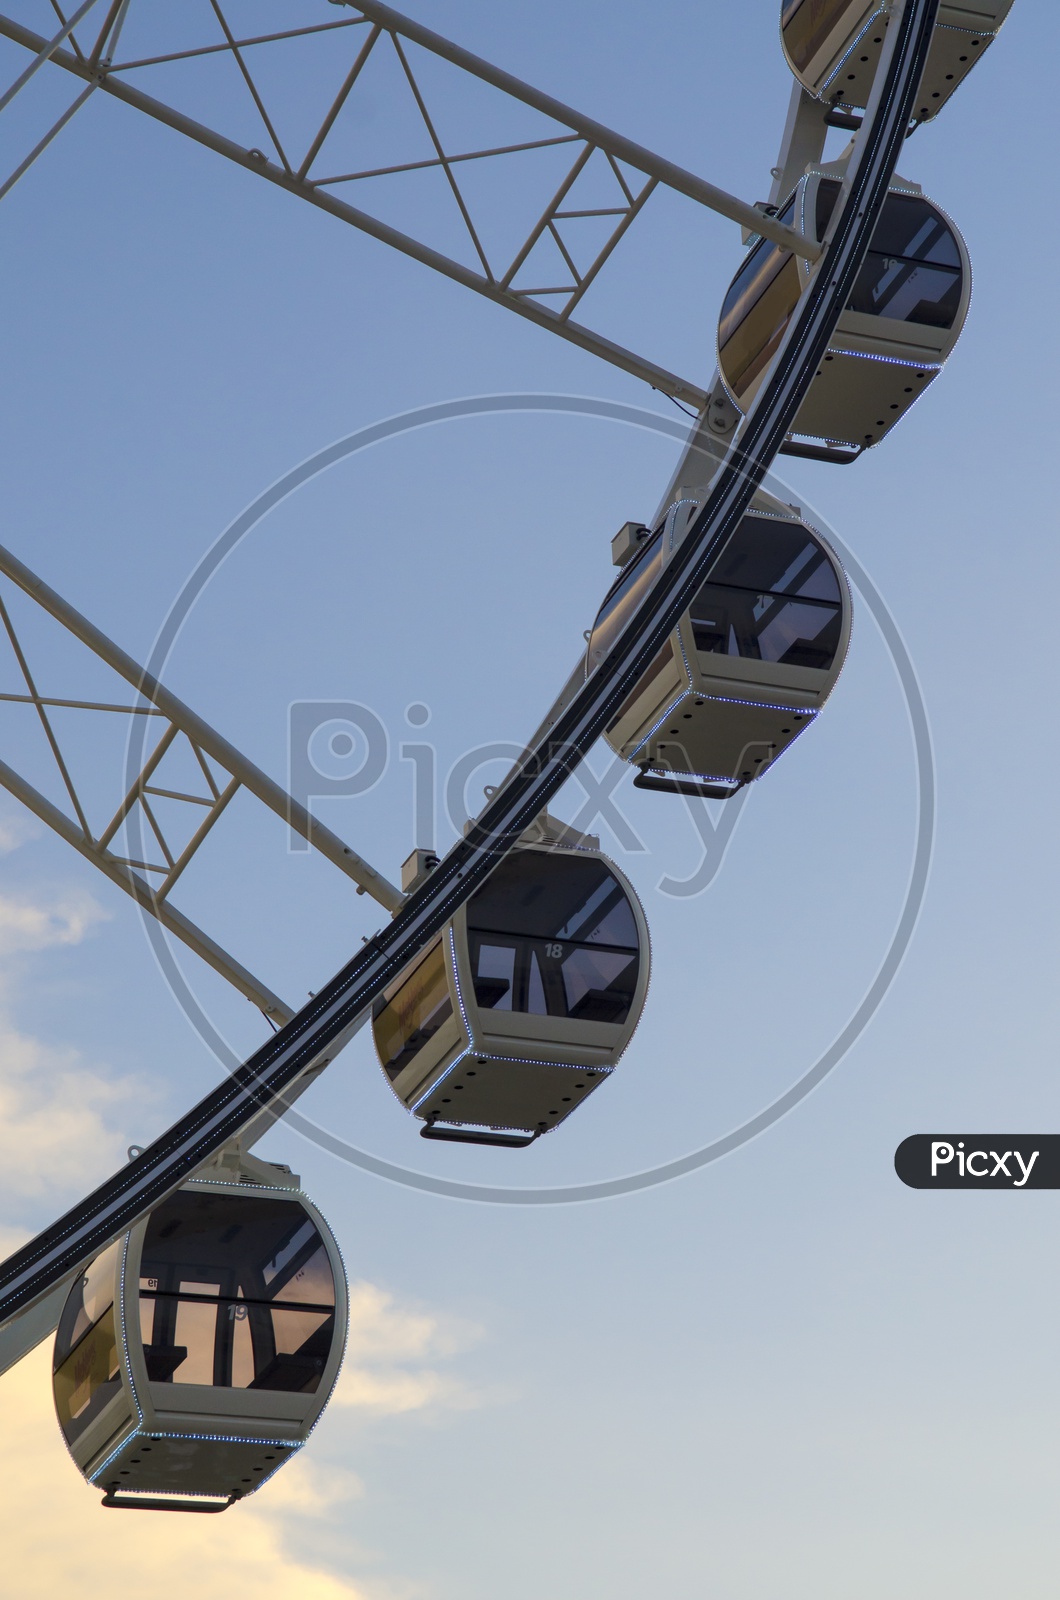 Beautiful large Ferris wheel With Passenger Cabins Or Capsules